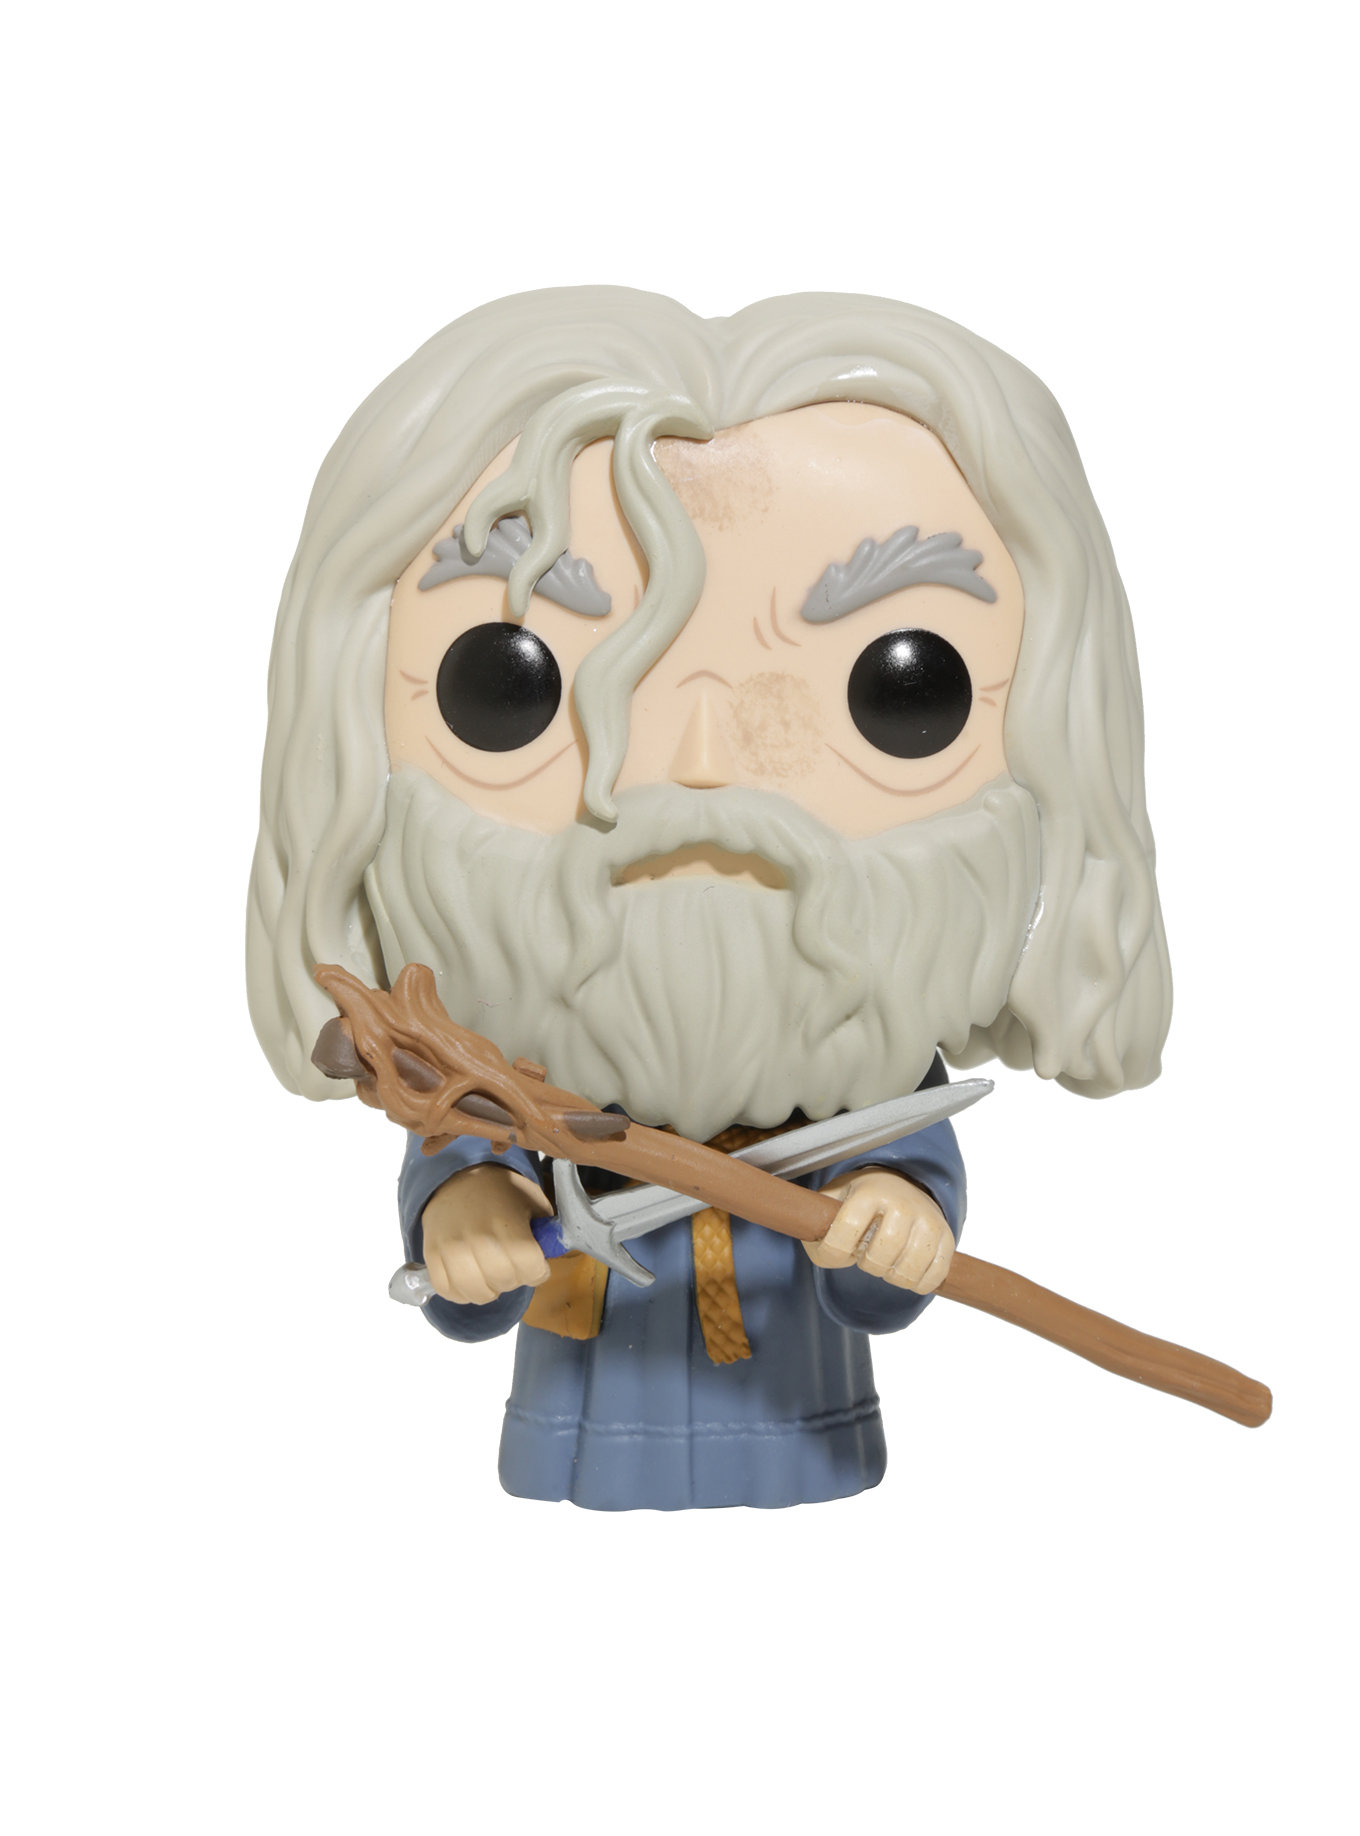 Bobble Figure The Lord of the Rings POP! - Gandalf 